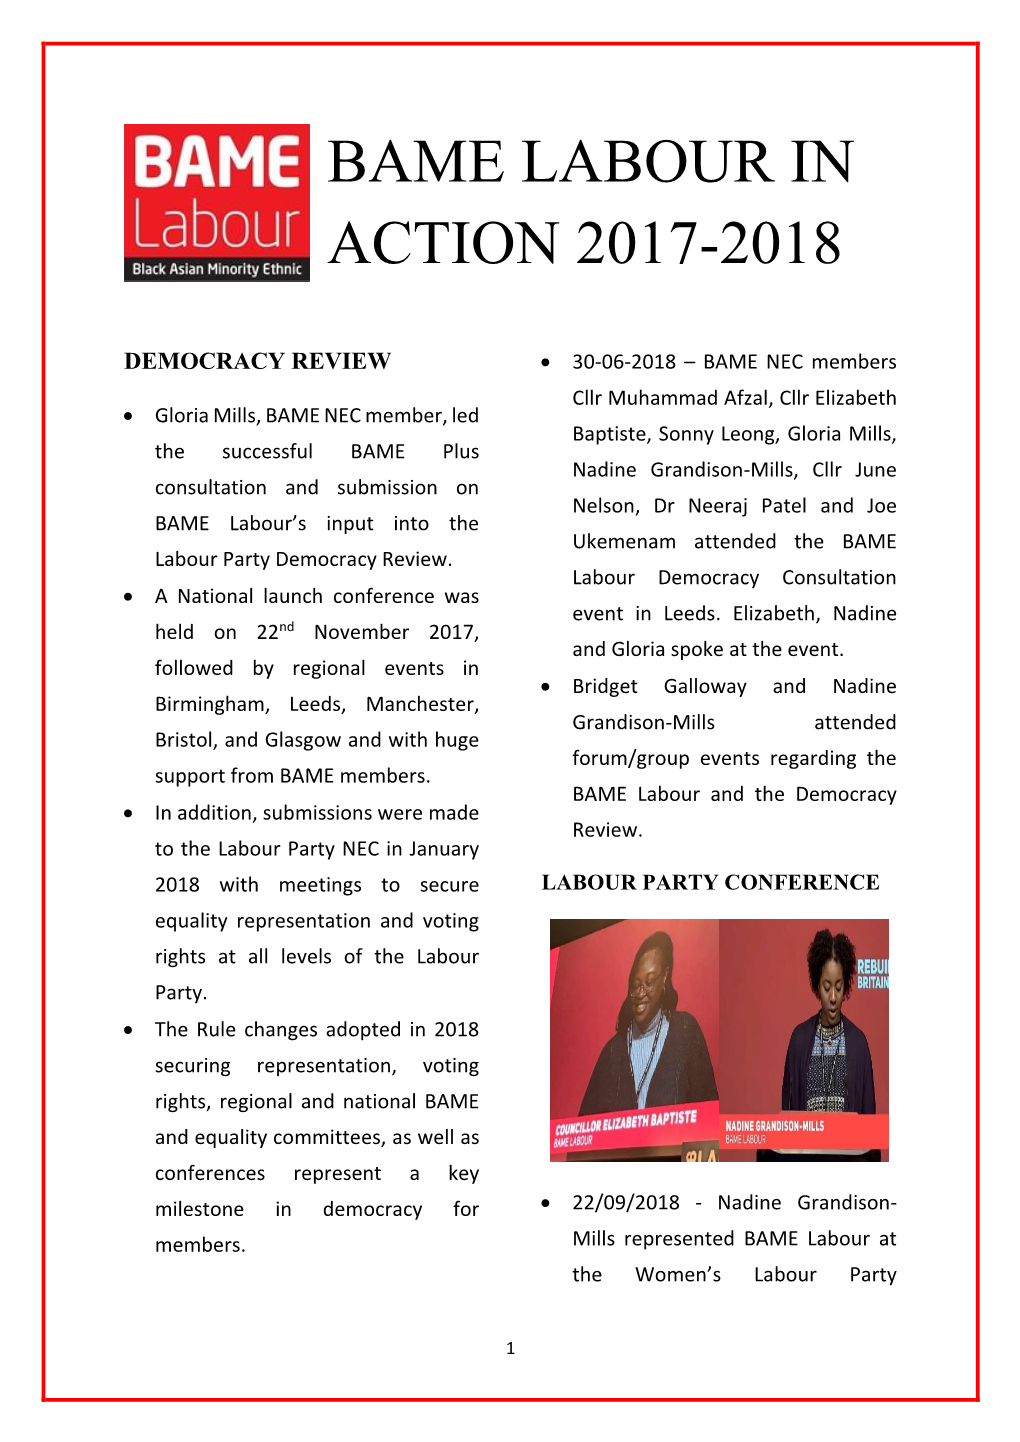 Bame Labour in Action 2017-2018